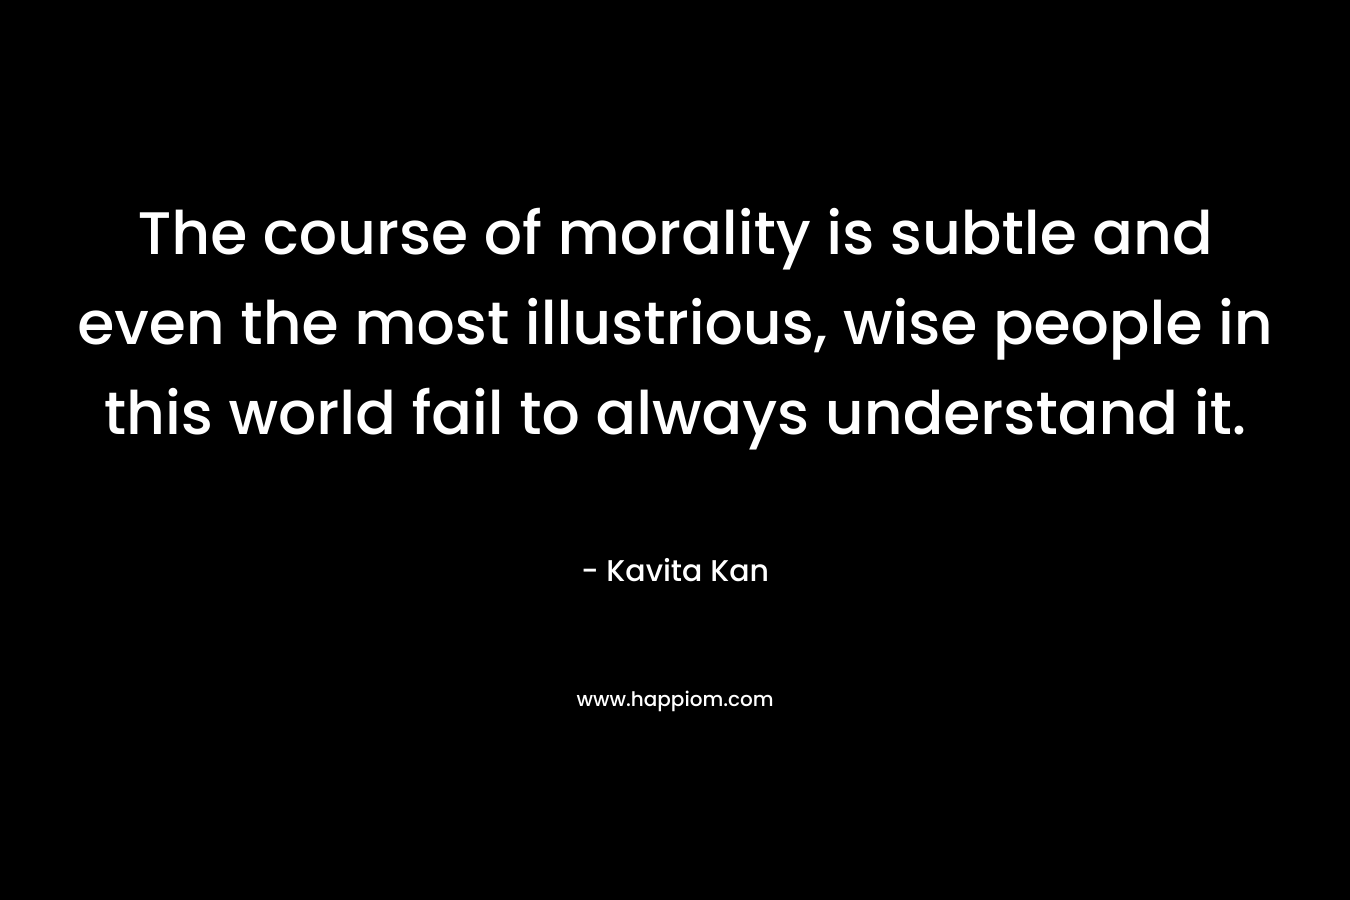 The course of morality is subtle and even the most illustrious, wise people in this world fail to always understand it.